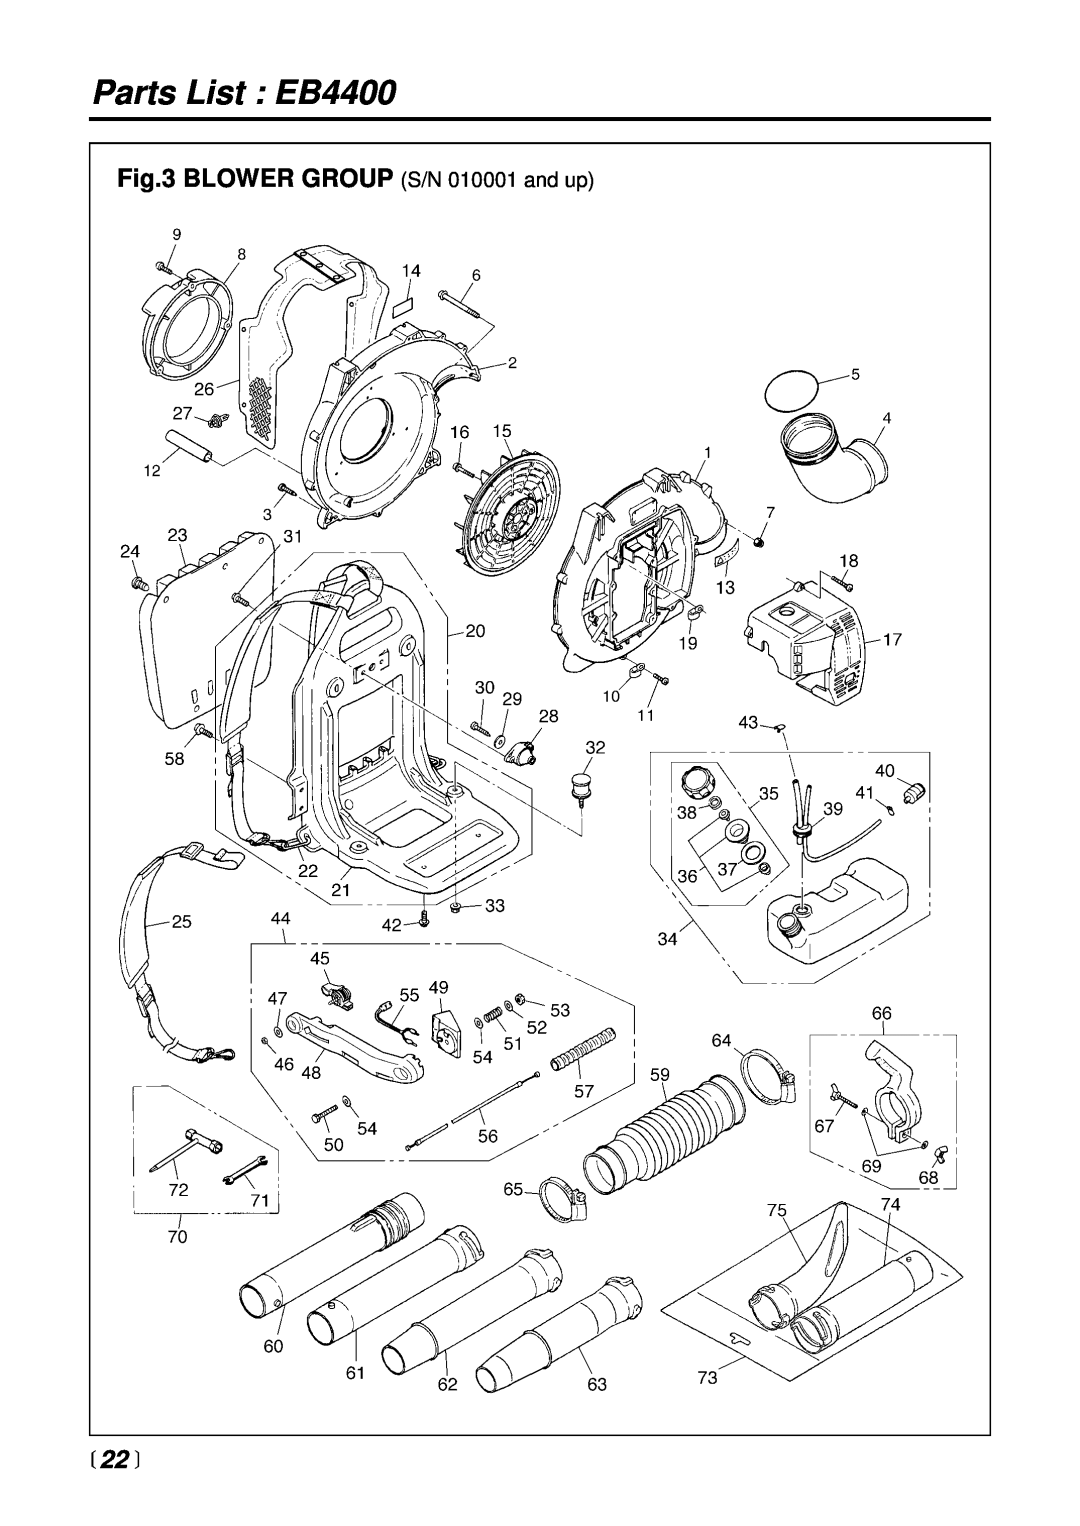 RedMax manual Parts List EB4400, BLOWER GROUP S/N 010001 and up,  22  